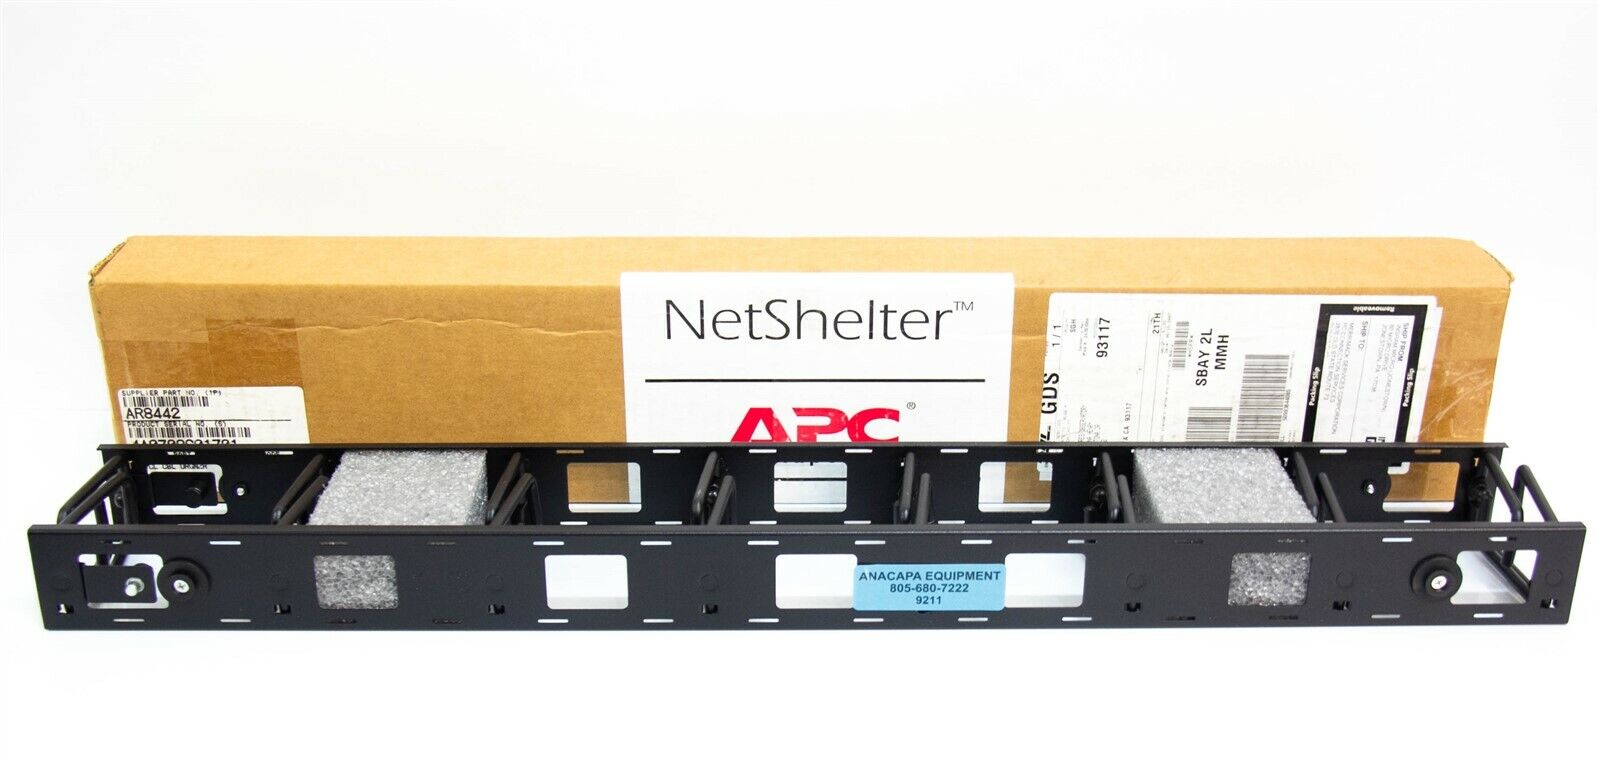 NetShelter APC AR8442 Vertical Cable Organizer Server Lot of 2 New (9211)K